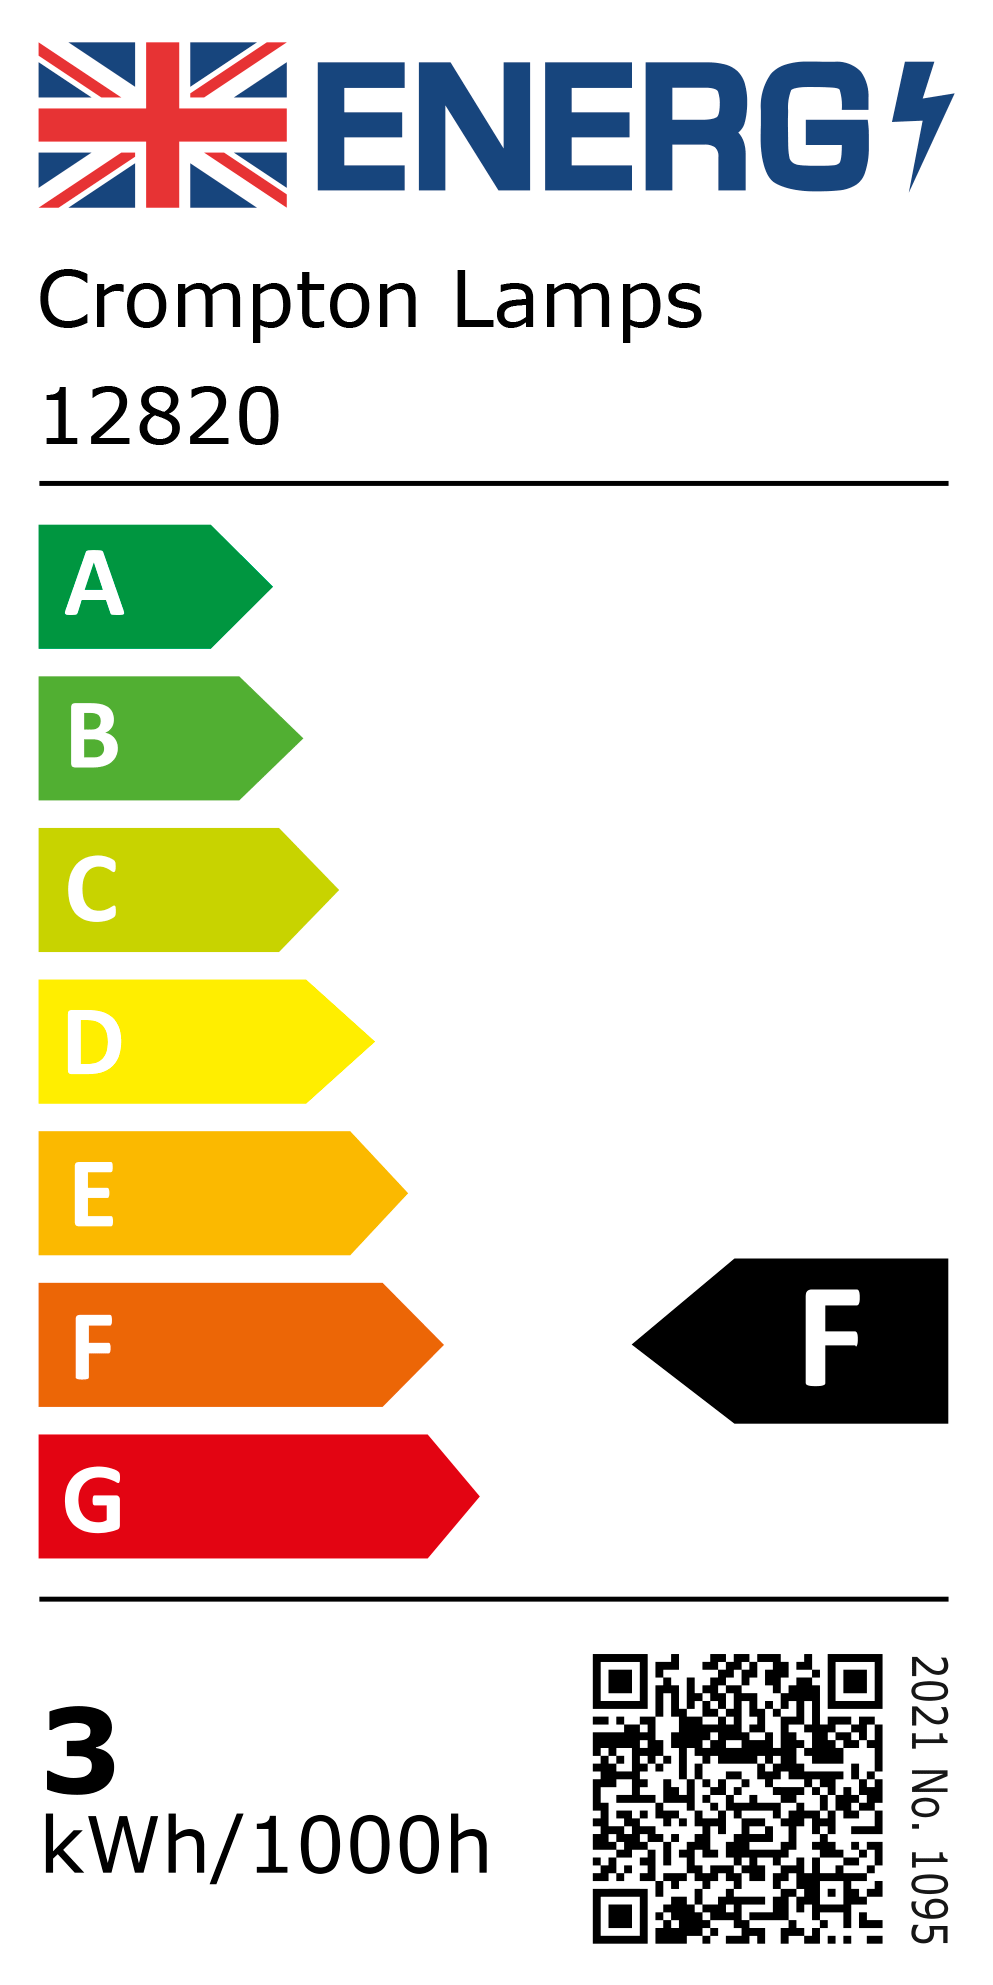 New 2021 Energy Rating Label: Stock Code 12820